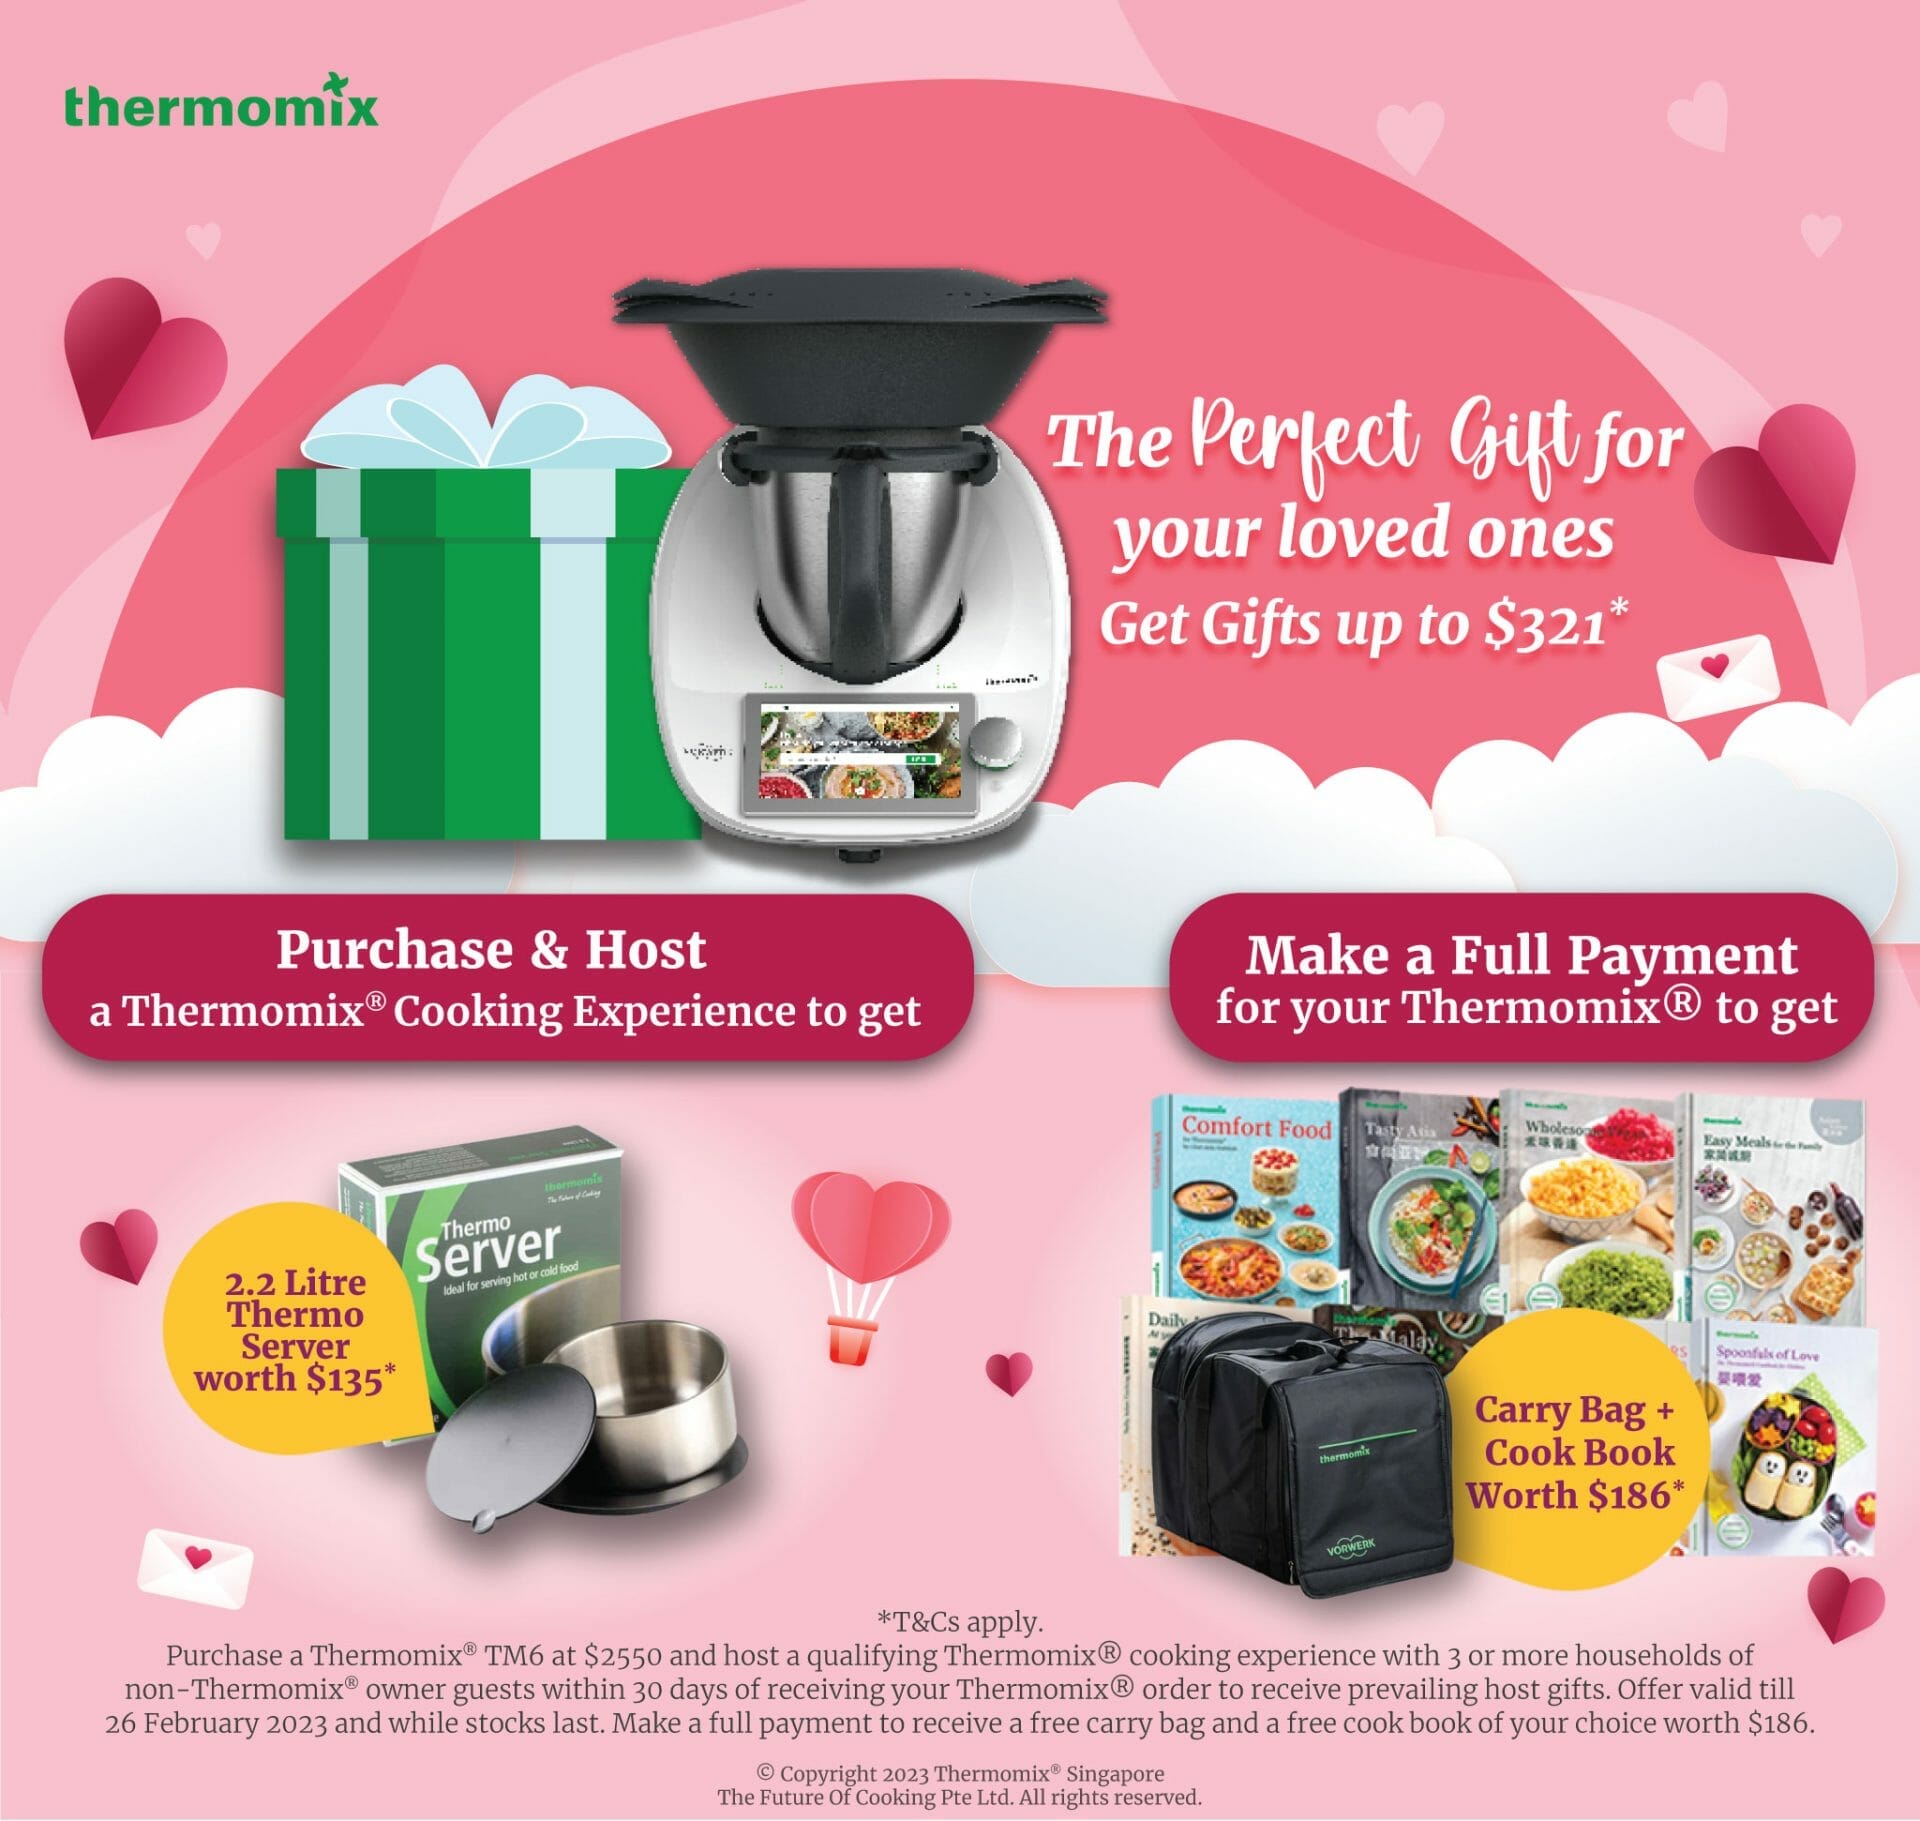 The Latest Thermomix® Promotion Thermomix Singapore